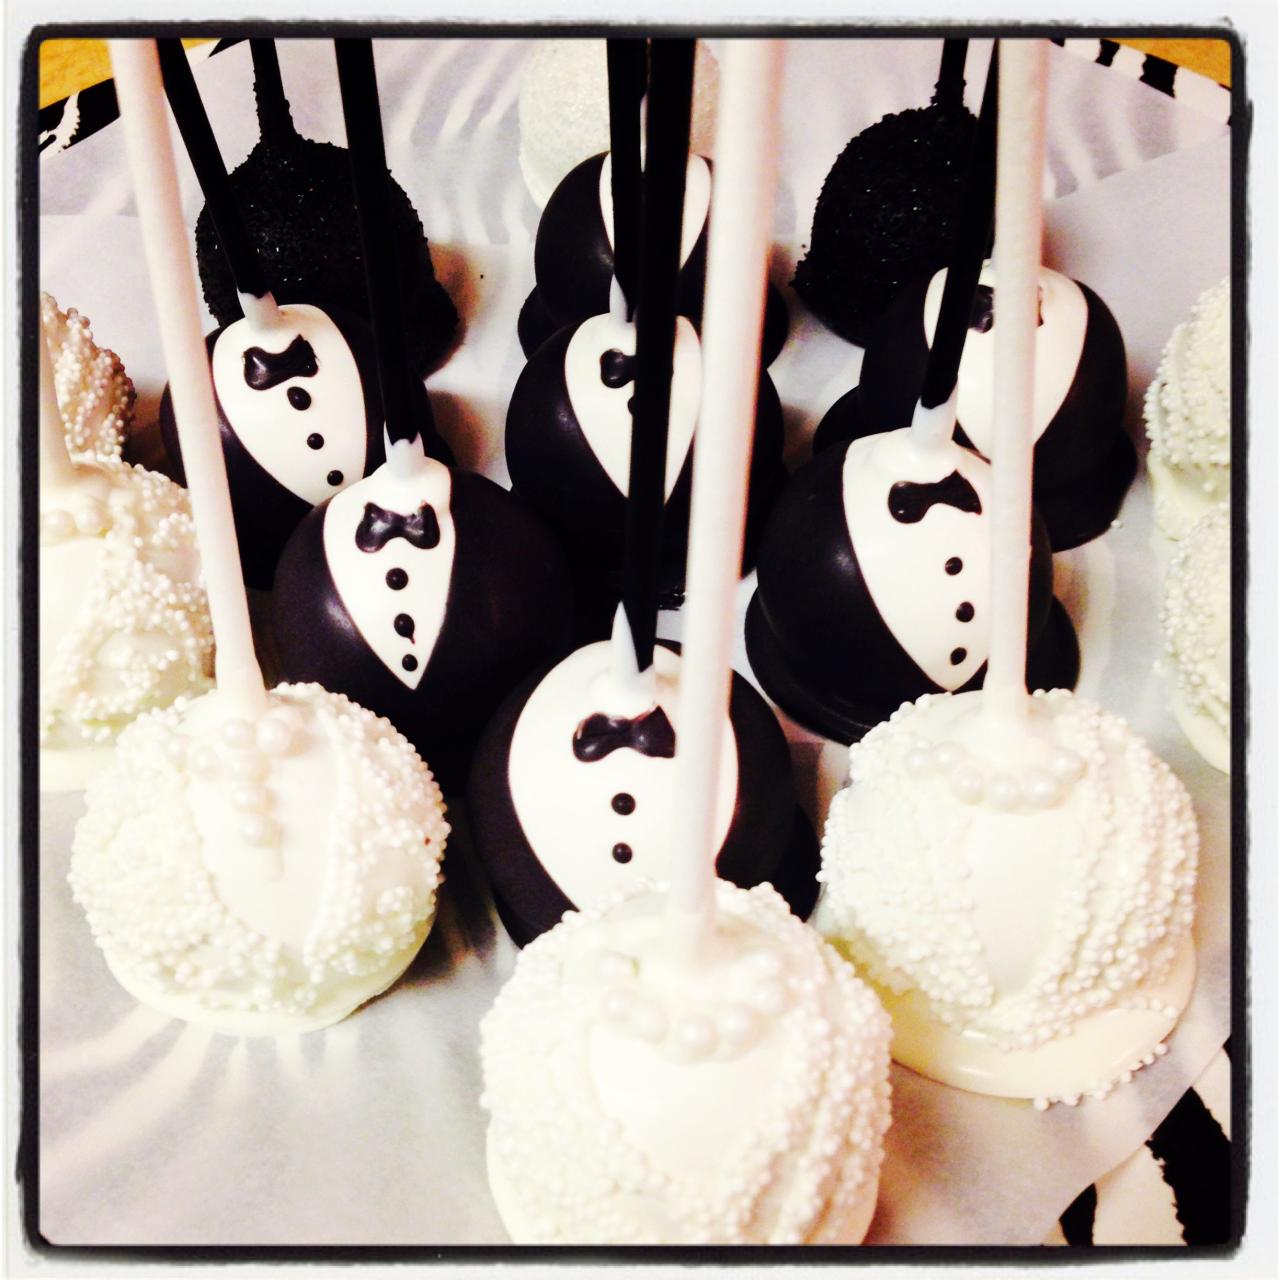 Cake pops bridal show groom bride pop homer drive ready travel long they